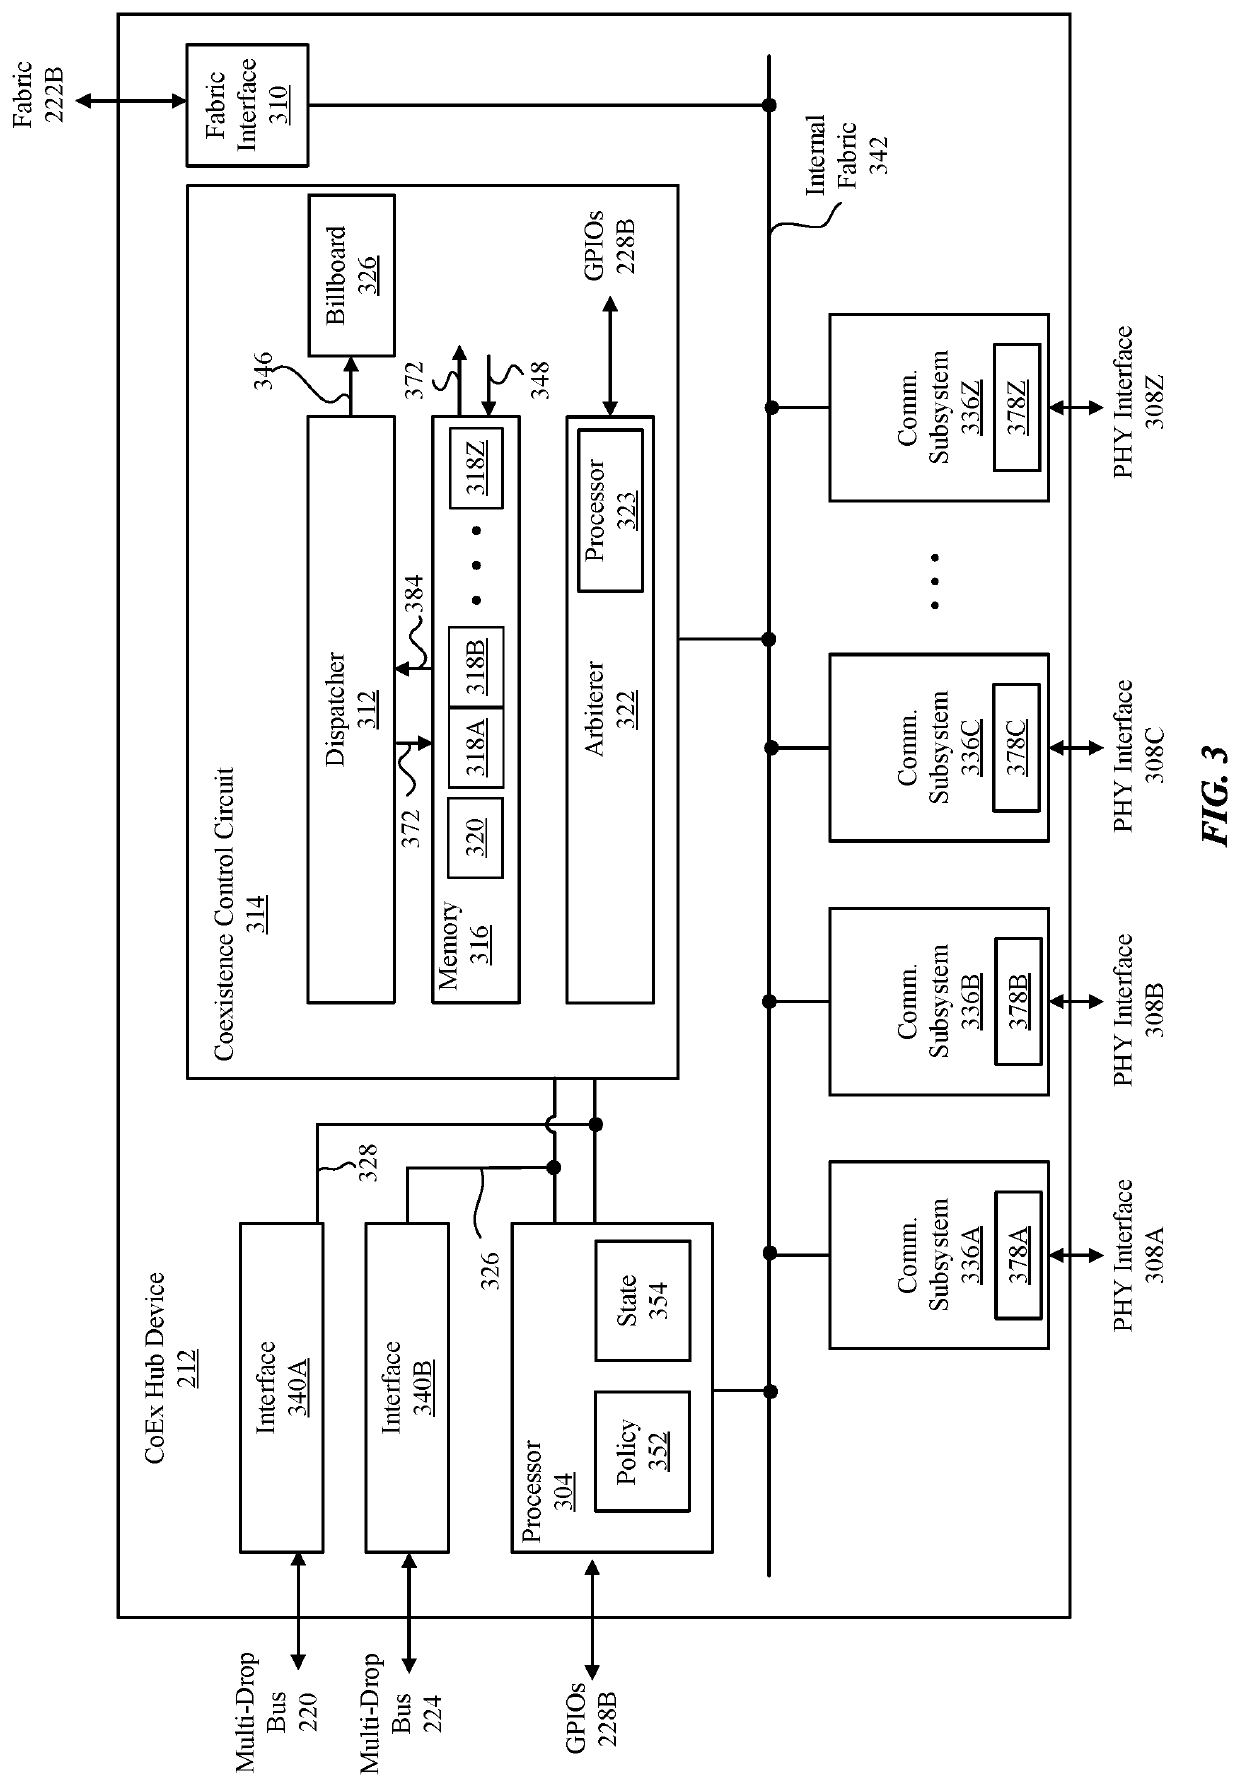 Coordinating operations of multiple communication chips via local hub device